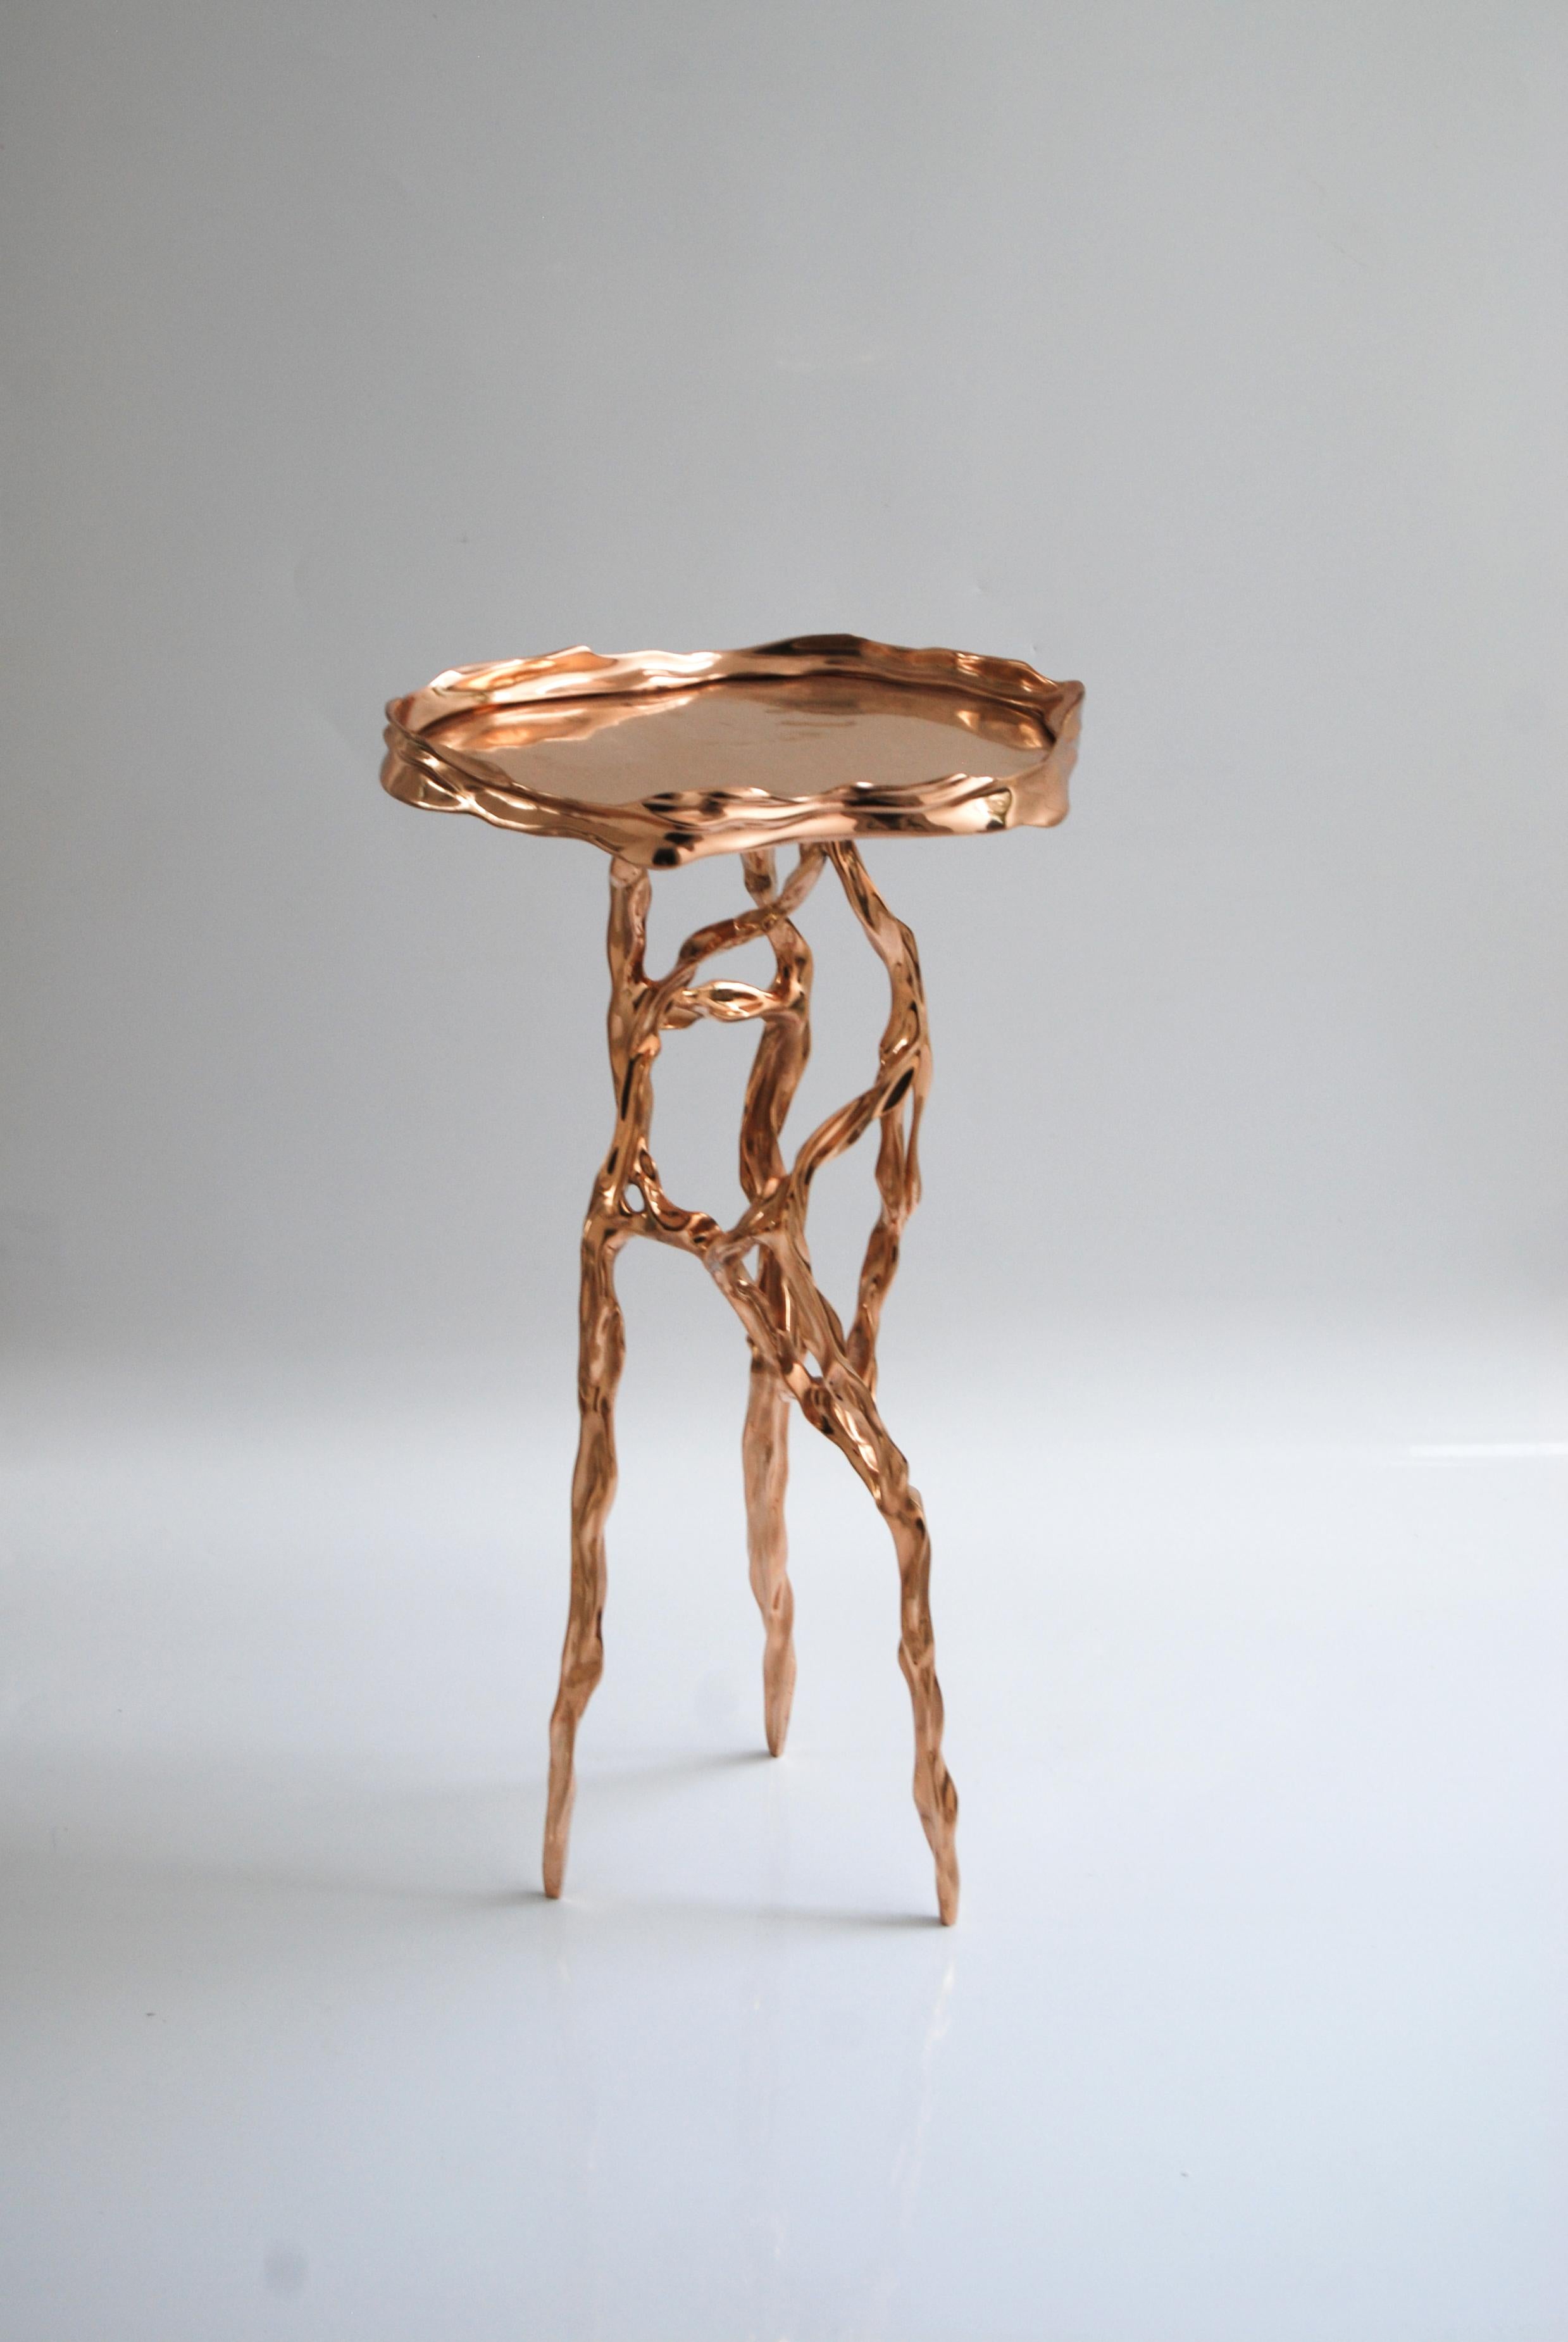 Polished bronze side table by FAKASAKA Design
Dimensions: W 28 x D 28 x H 62 cm
Materials: Polished bronze.

 